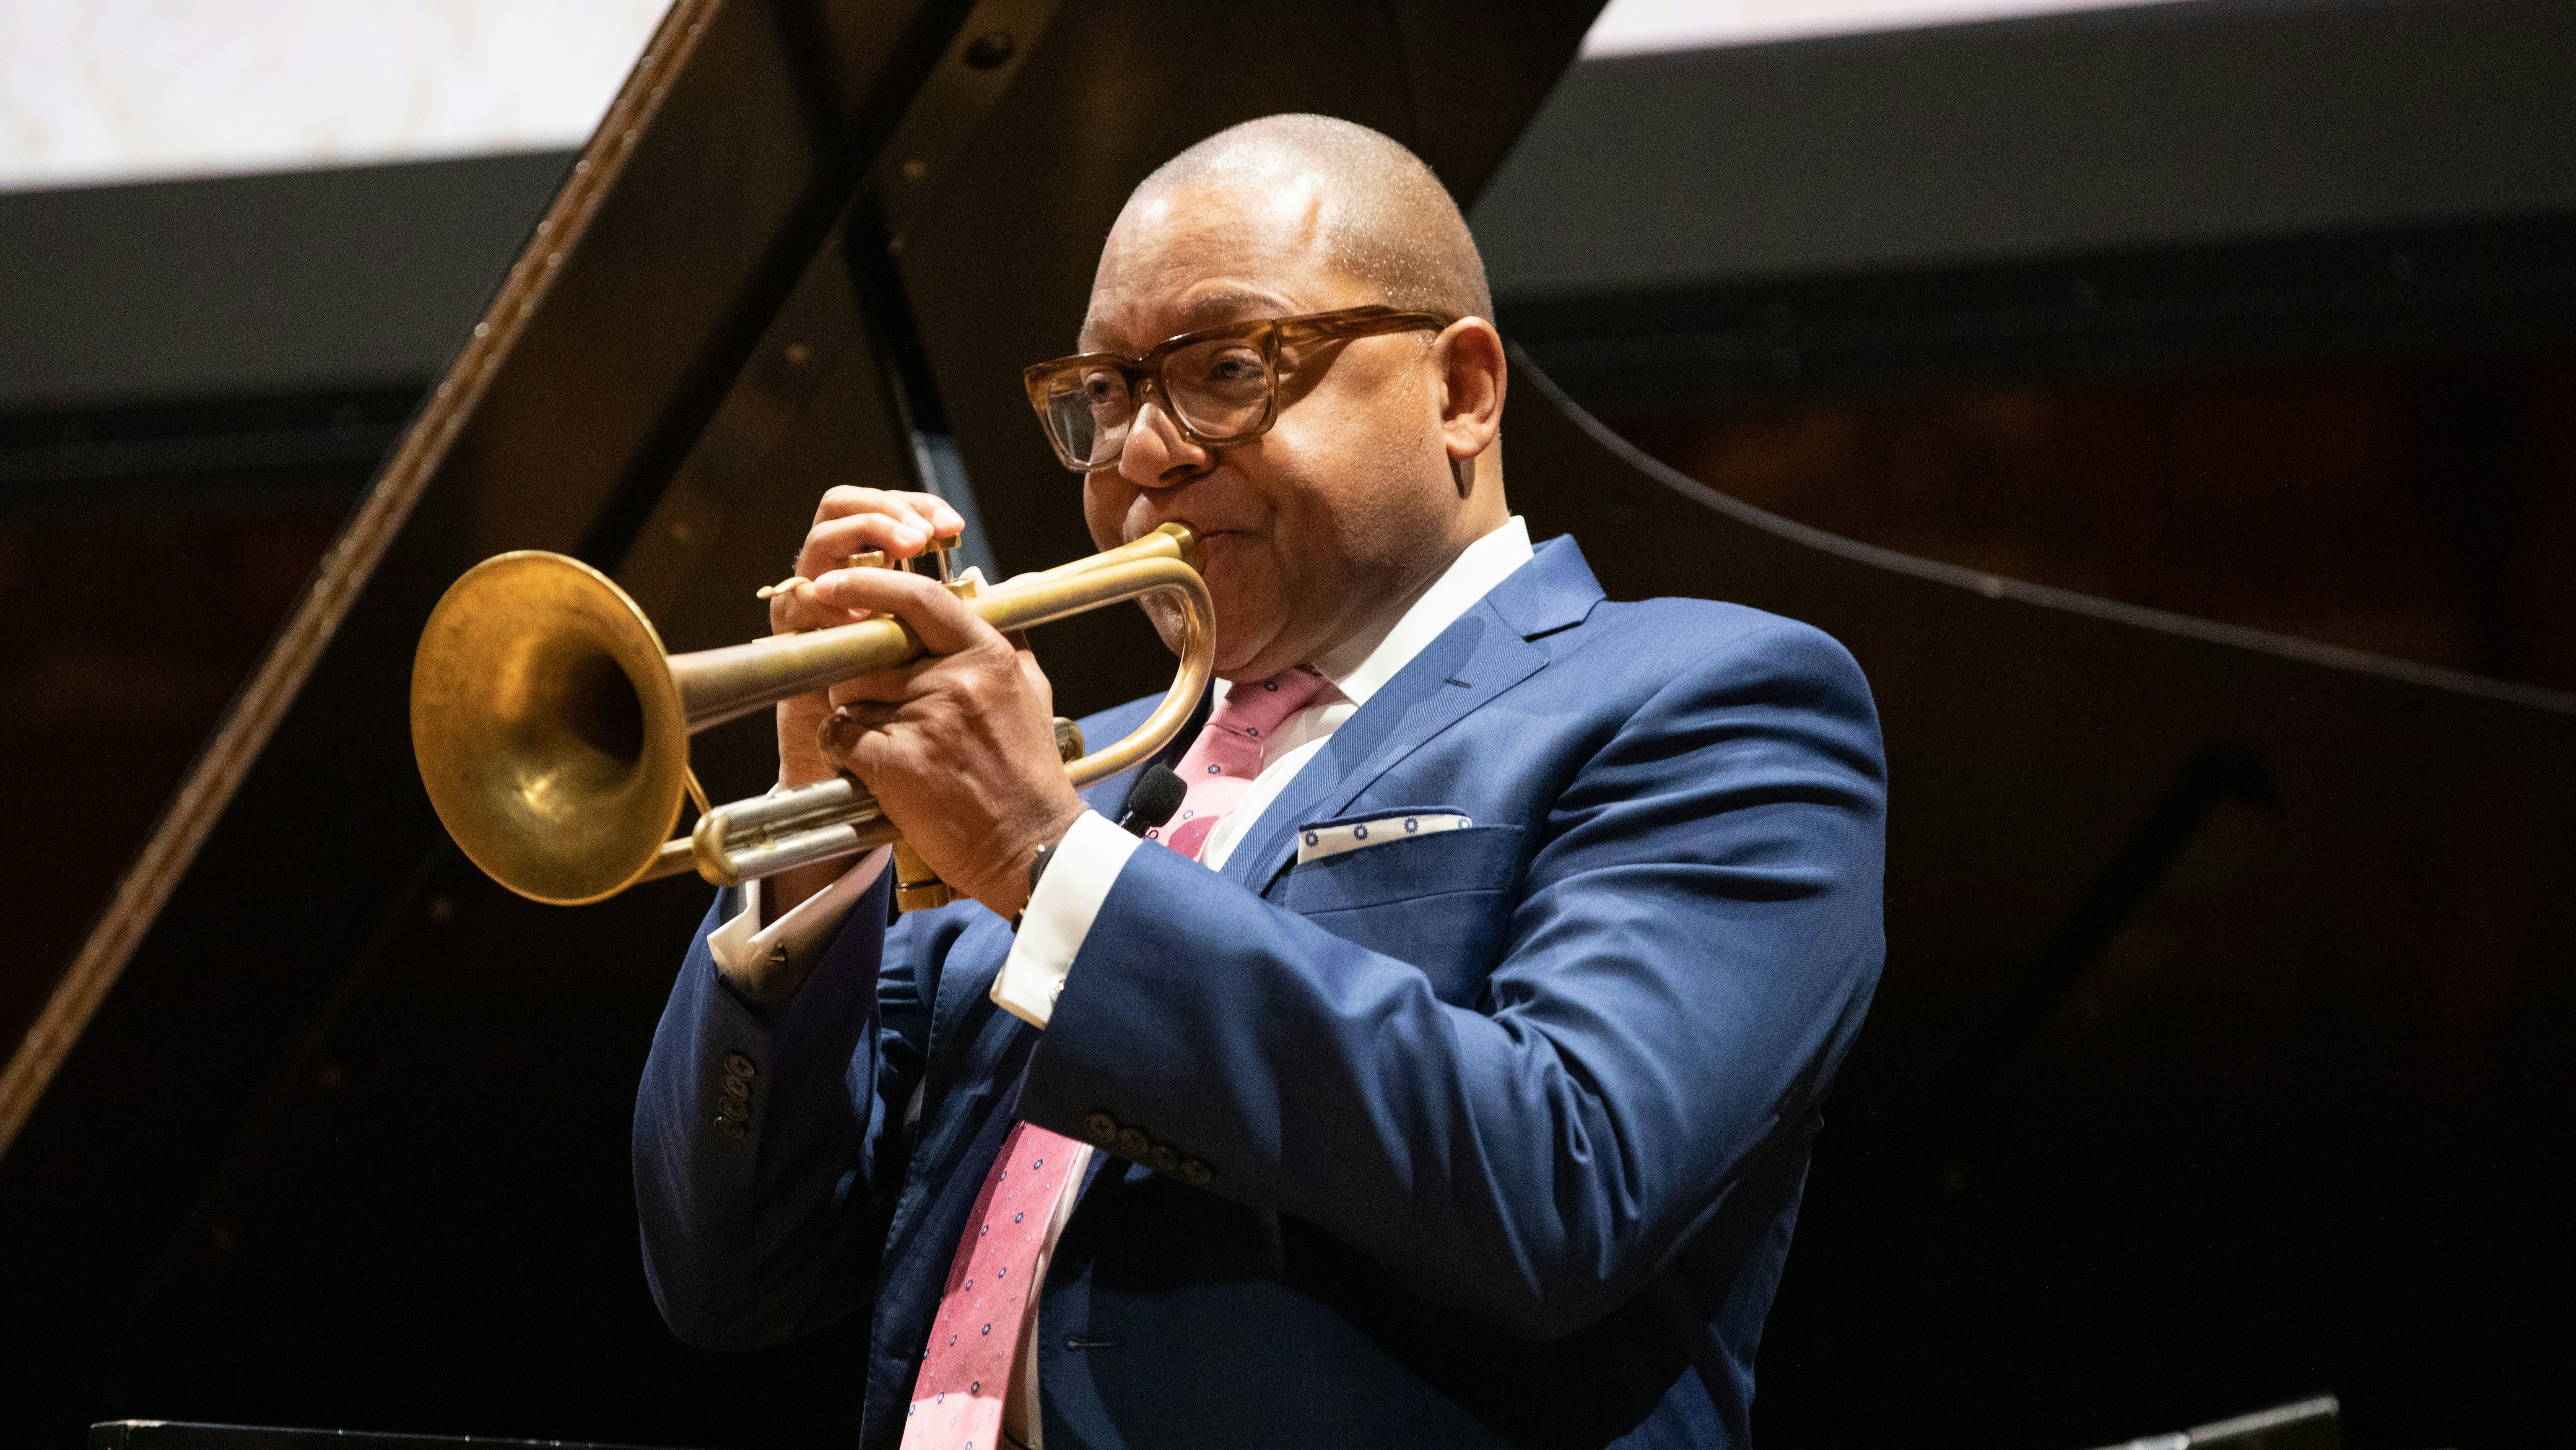 Wynton Marsalis playing the trumpet at Radcliffe's "Vision & Justice" convening.